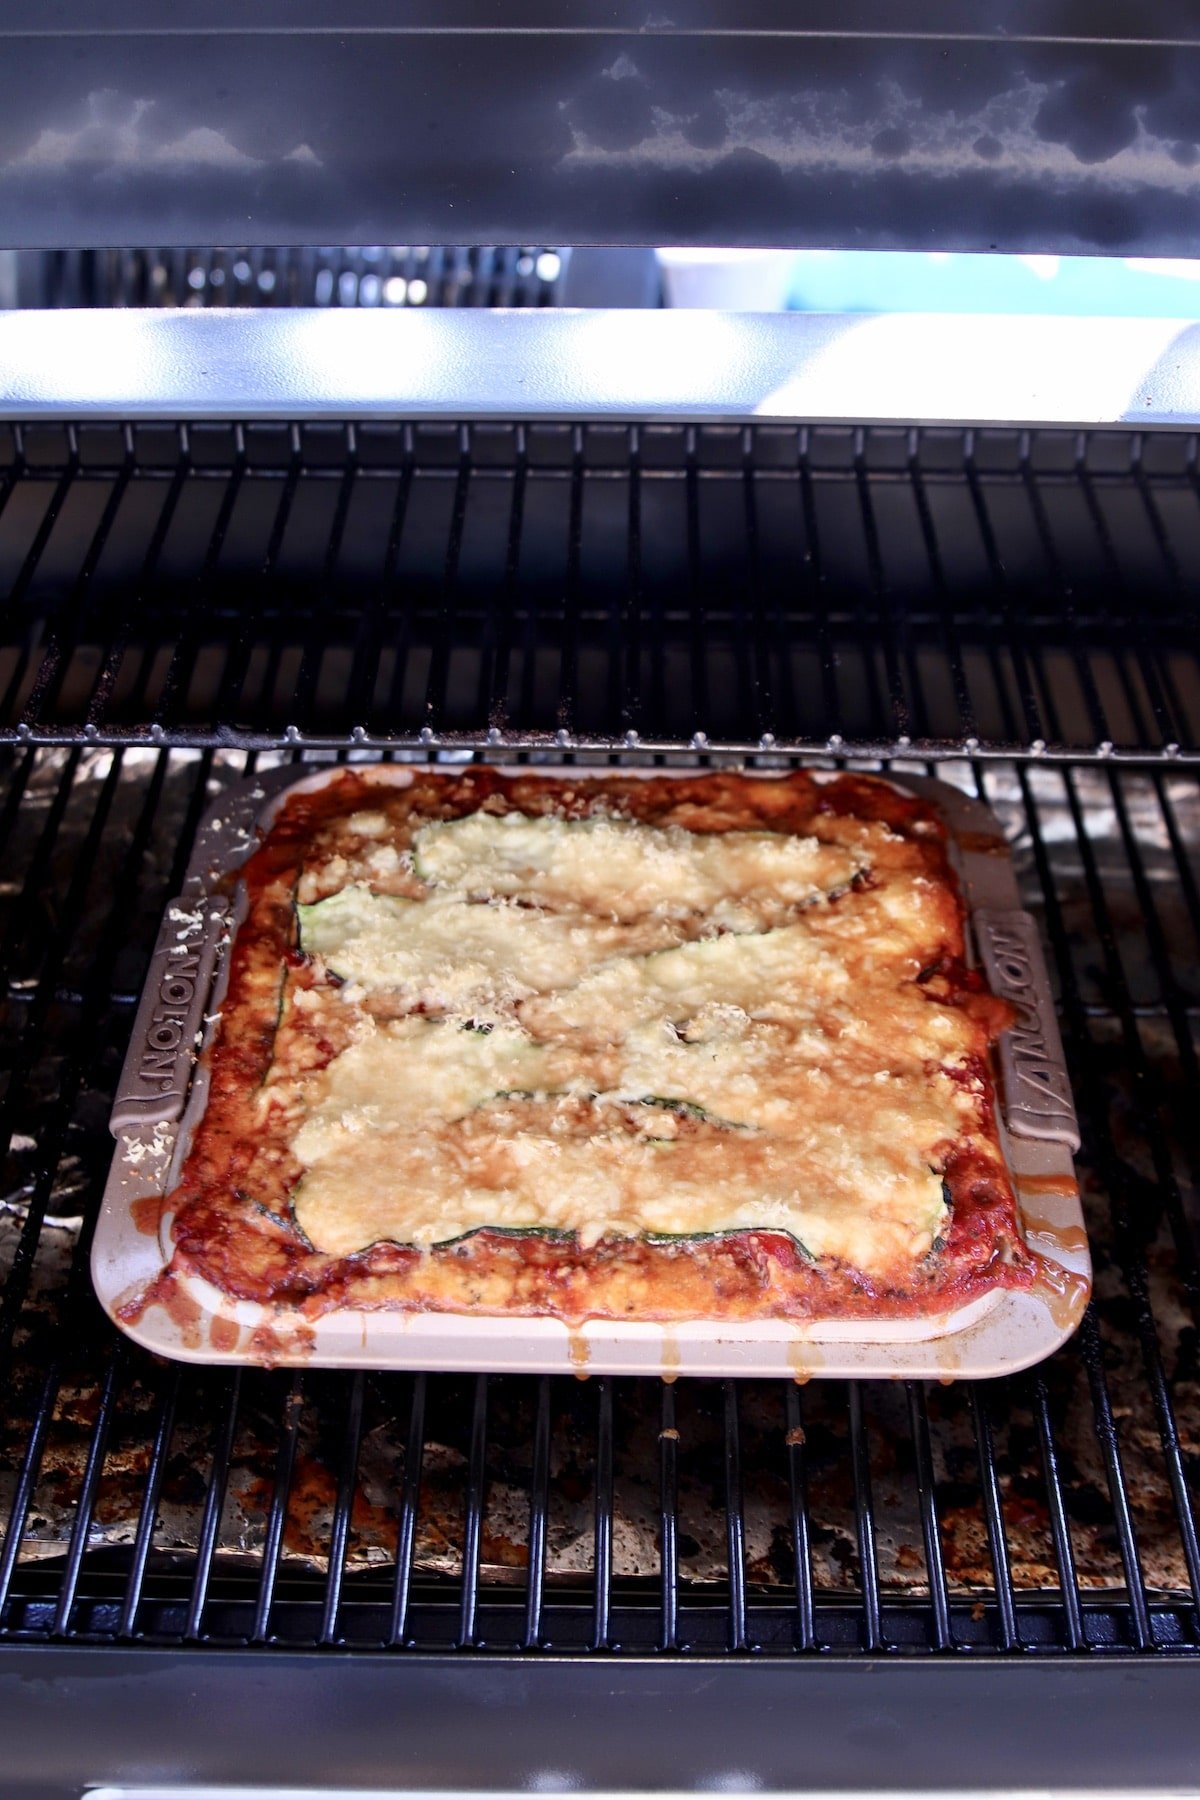 Grilled lasagna on a pellet grill.